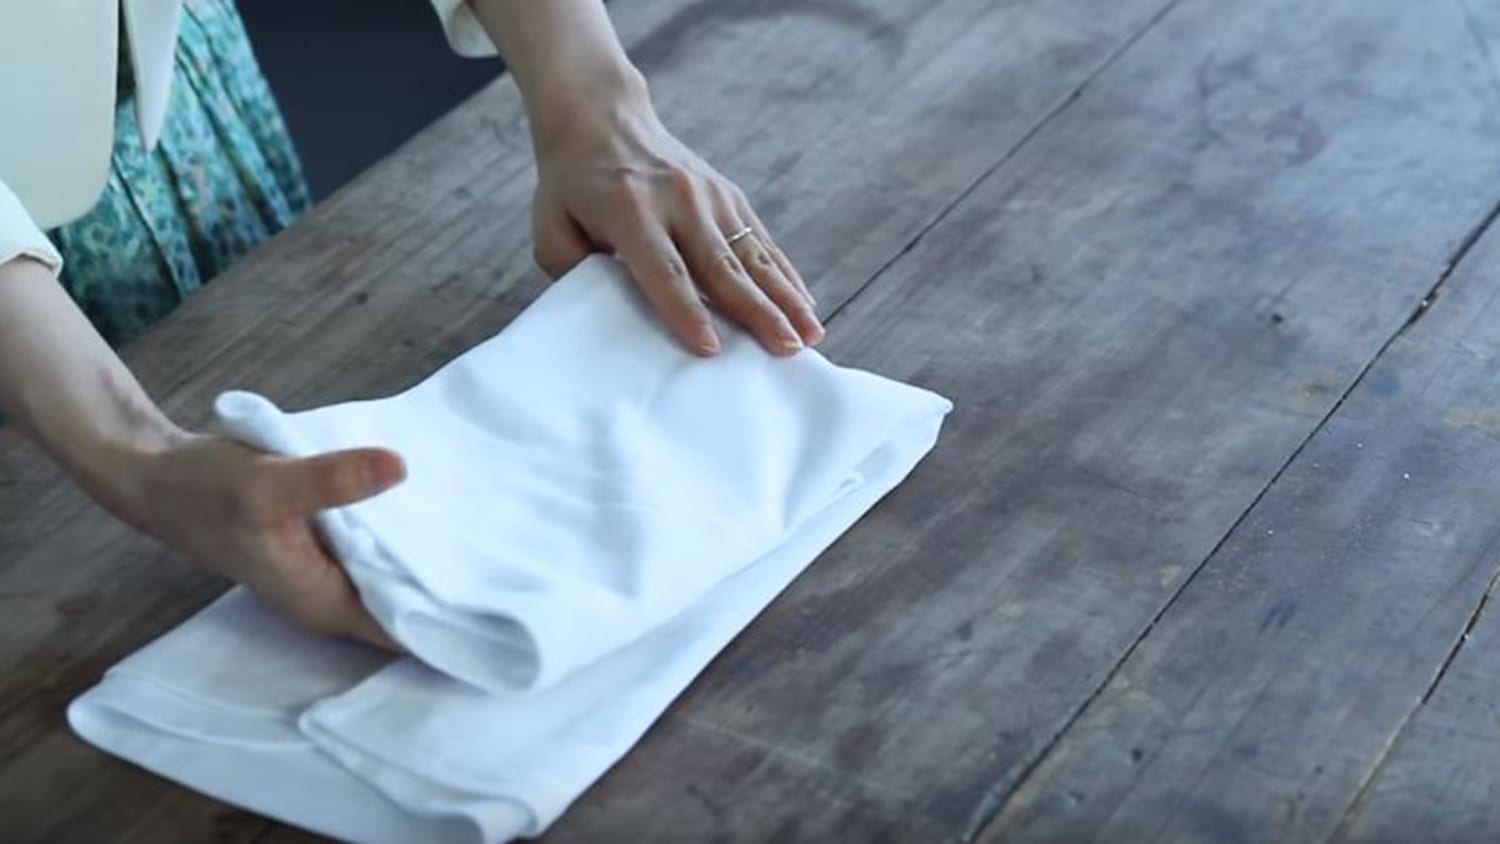 Marie Kondo shows how to properly fold a shirt, camisole